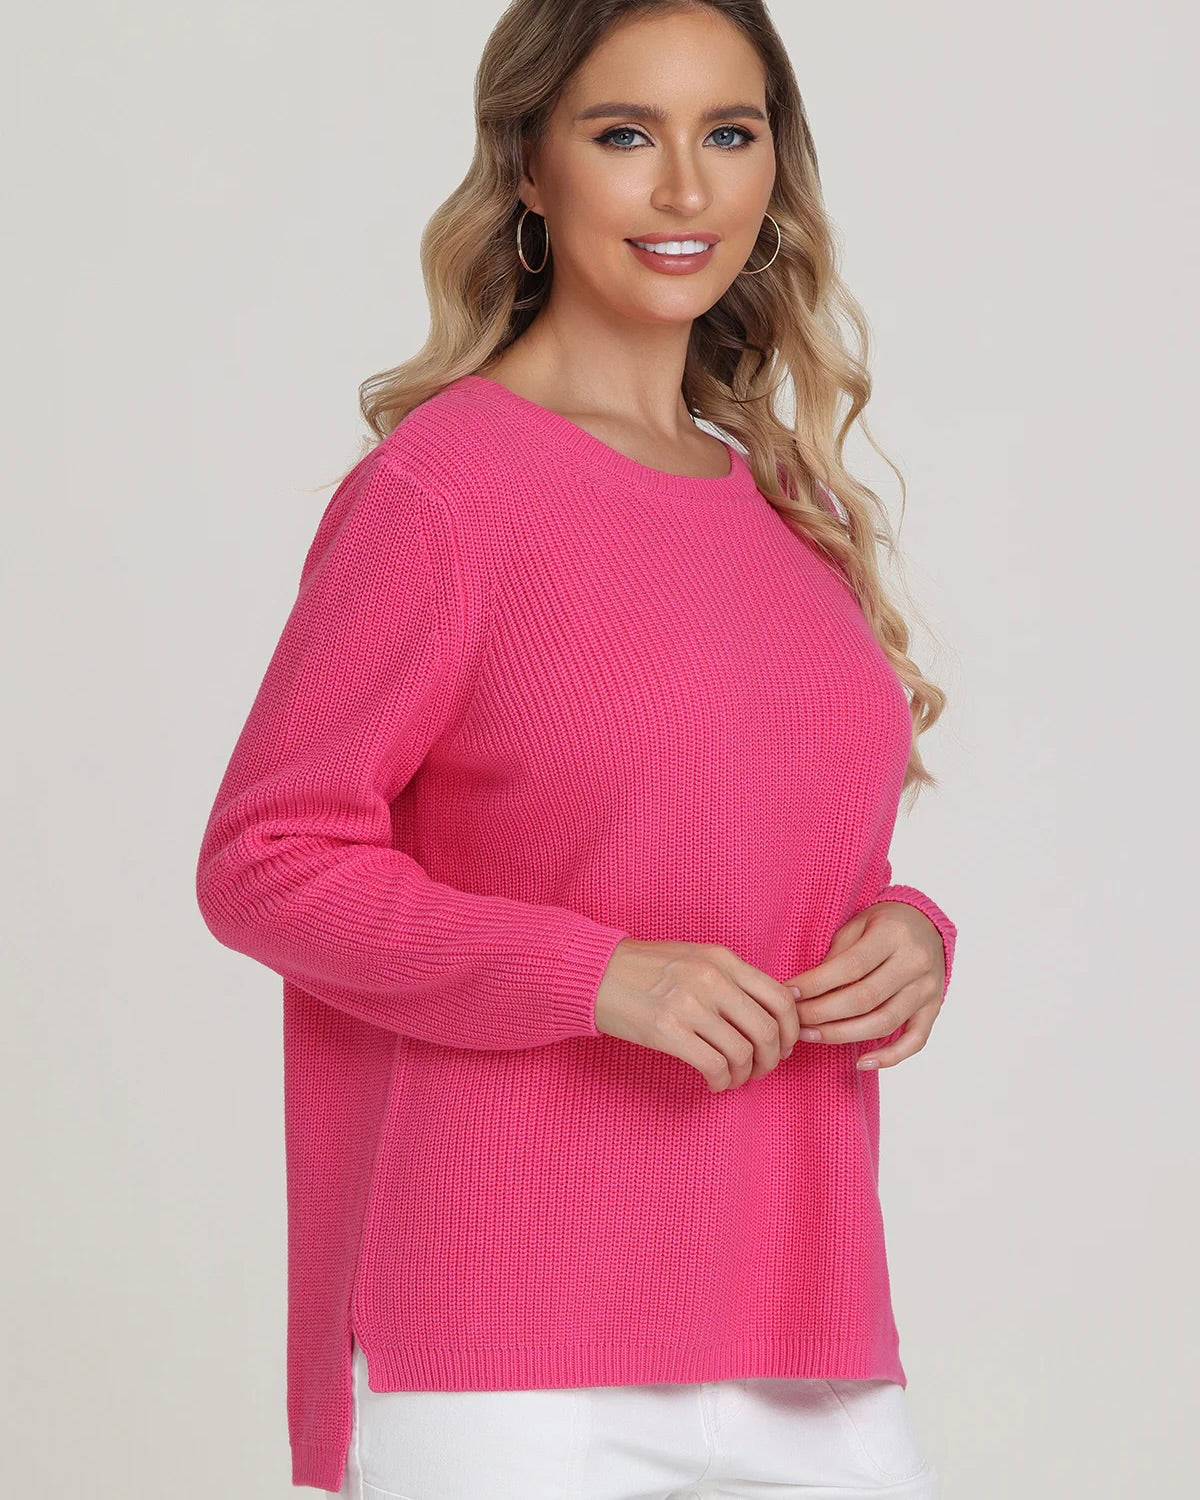 Model wearing 525 America Emma Crewneck Shaker Stitch Sweater in shocking pink color wearing white pants on a white background